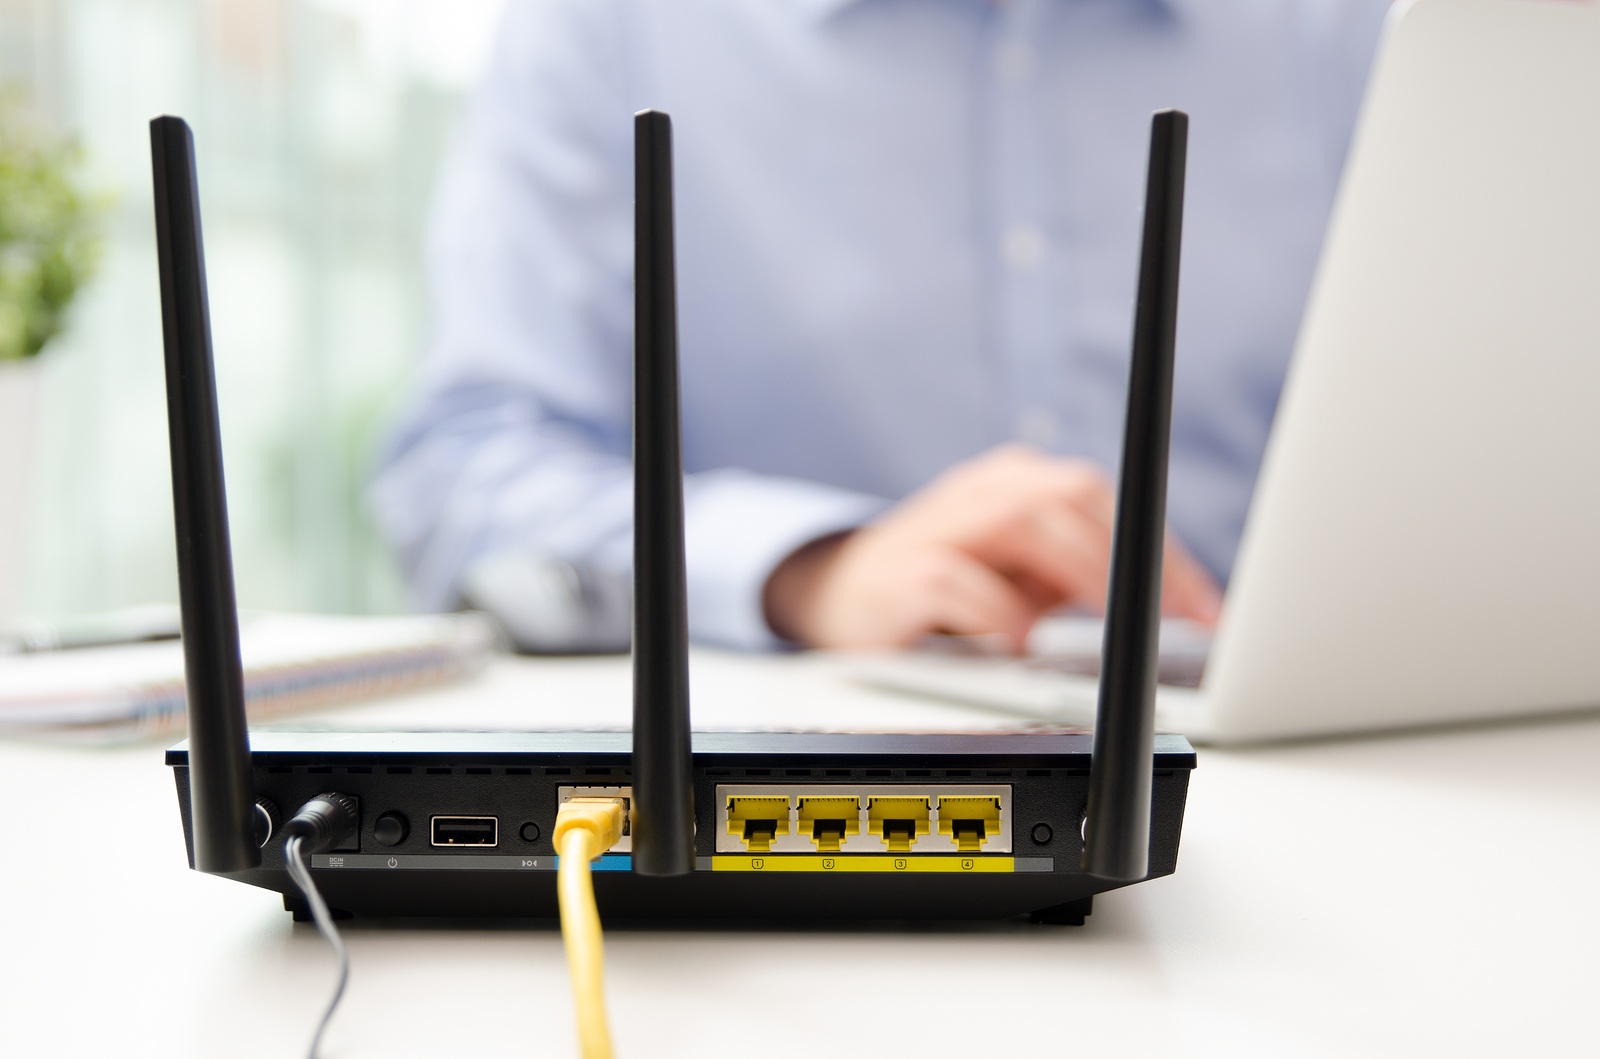 bigstock-Wireless-Router-And-Man-Using-216152386.jpg (729 KB)